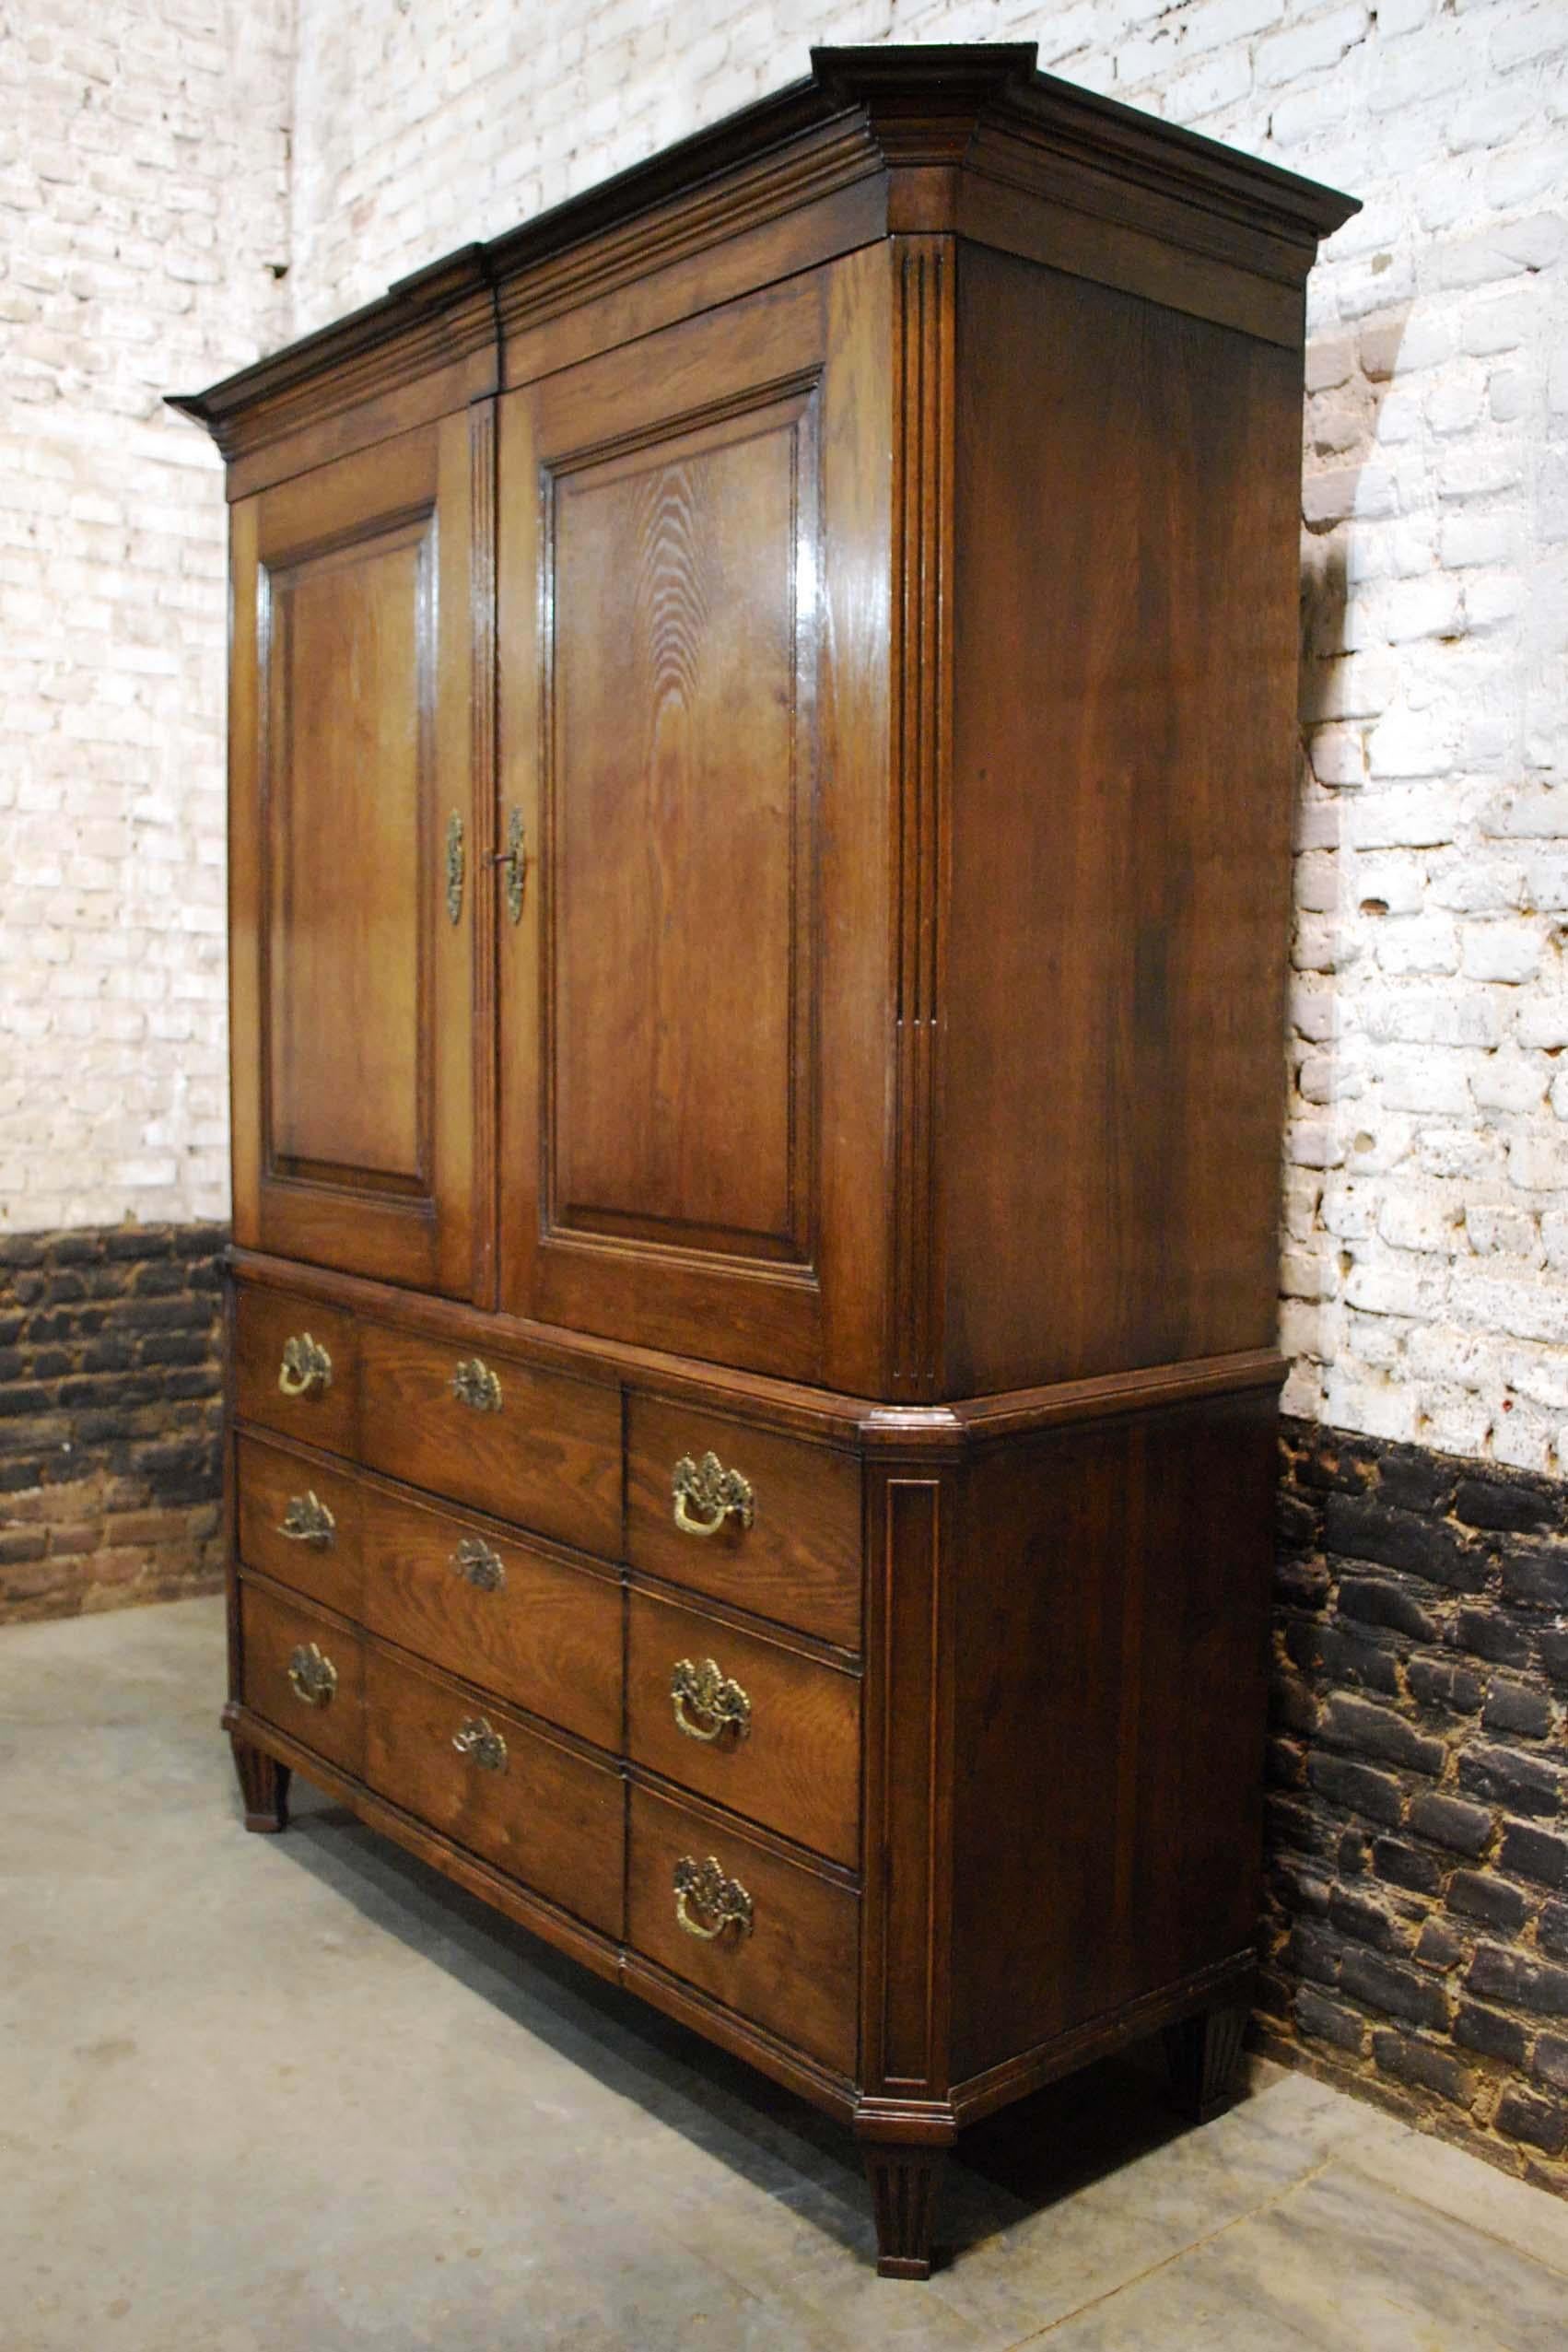 A beautiful Empire style or Louis seize cabinet that was made in the Netherlands, circa 1820s.
This high quality piece is completely made in the finest European oak. There are three stepped drawers in the lower section. The drawers are fitted with